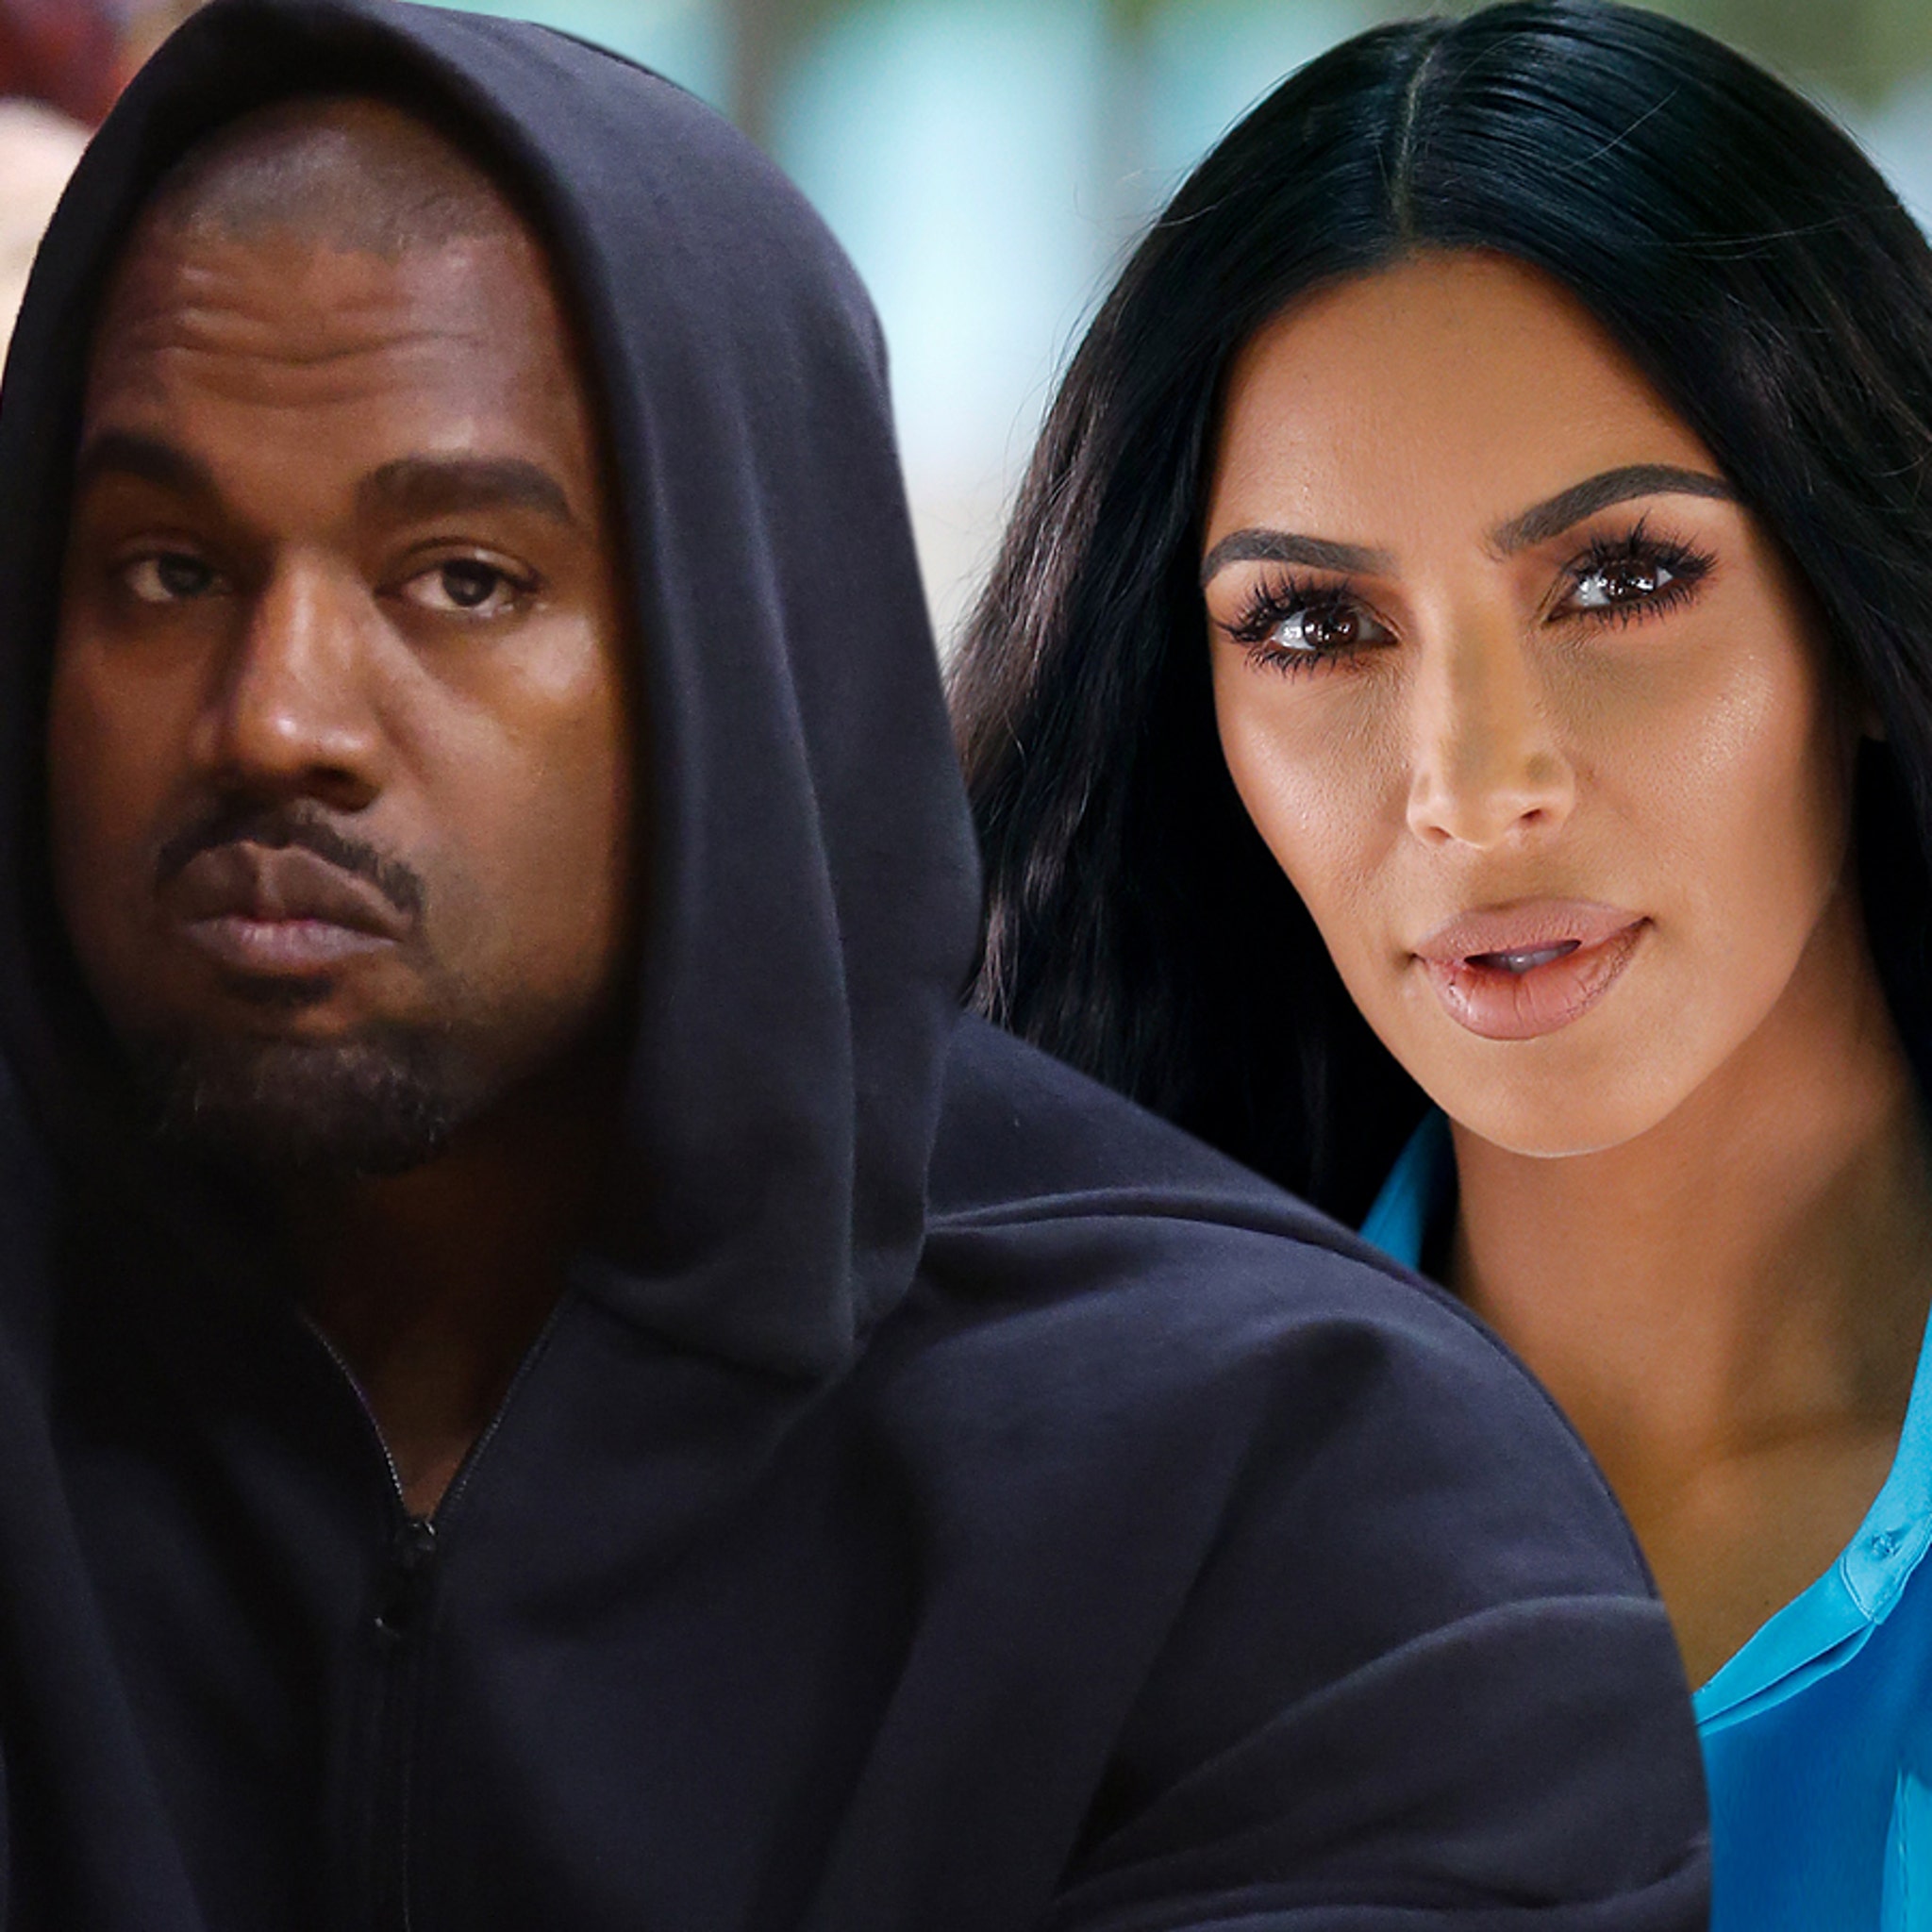 School Sex Video Com Download - Kanye West Goes After Kim Kardashian and Family, Calls Himself a Sperm Donor